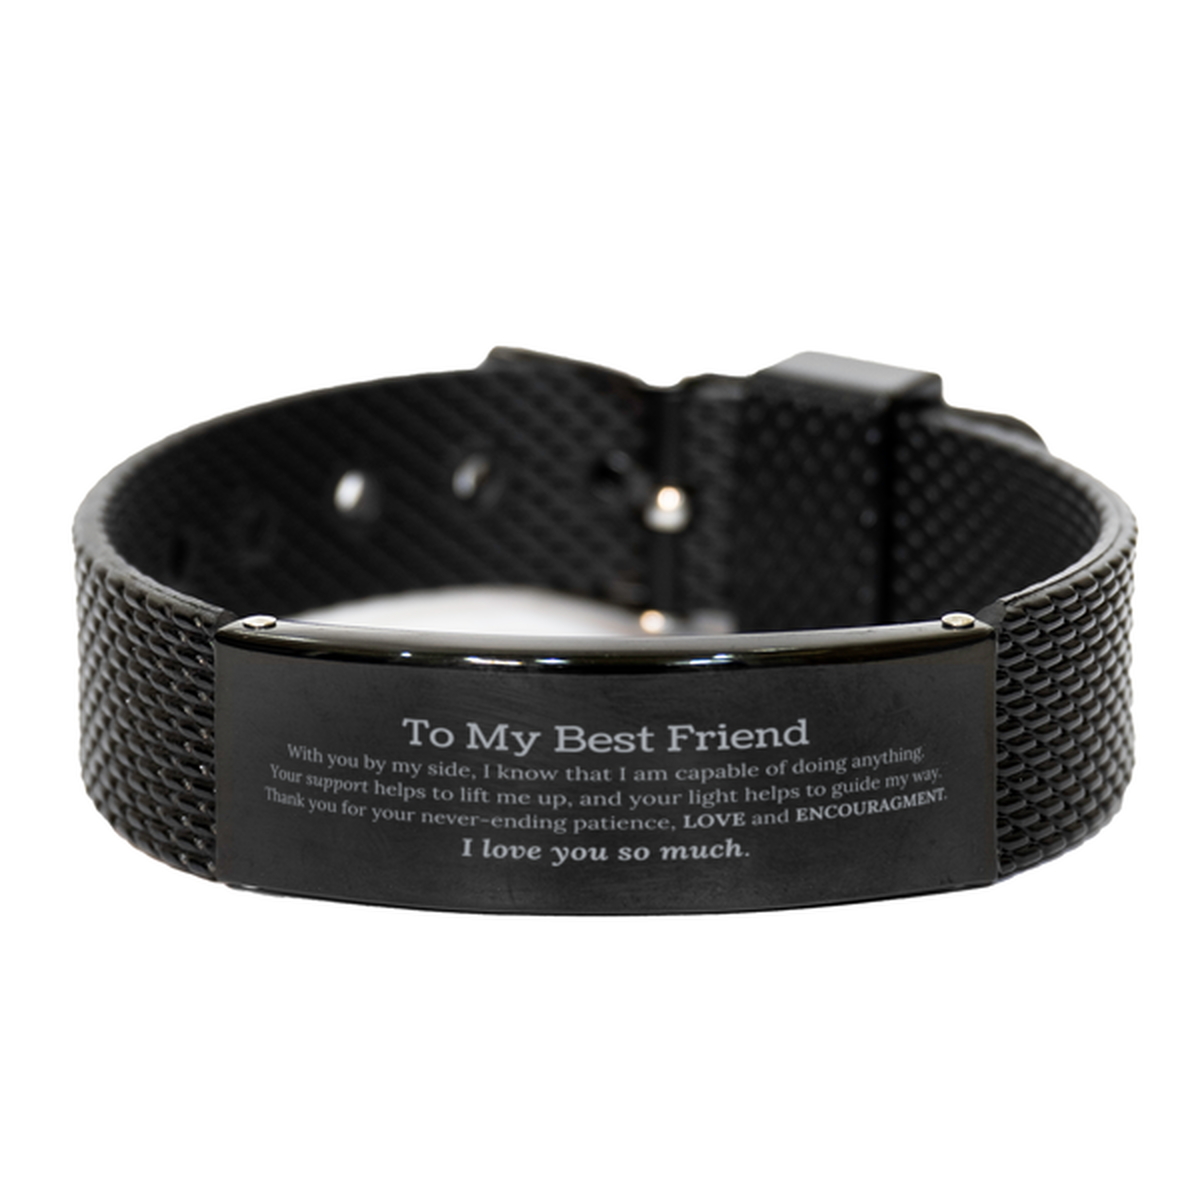 Appreciation Best Friend Black Shark Mesh Bracelet Gifts, To My Best Friend Birthday Christmas Wedding Keepsake Gifts for Best Friend With you by my side, I know that I am capable of doing anything. I love you so much